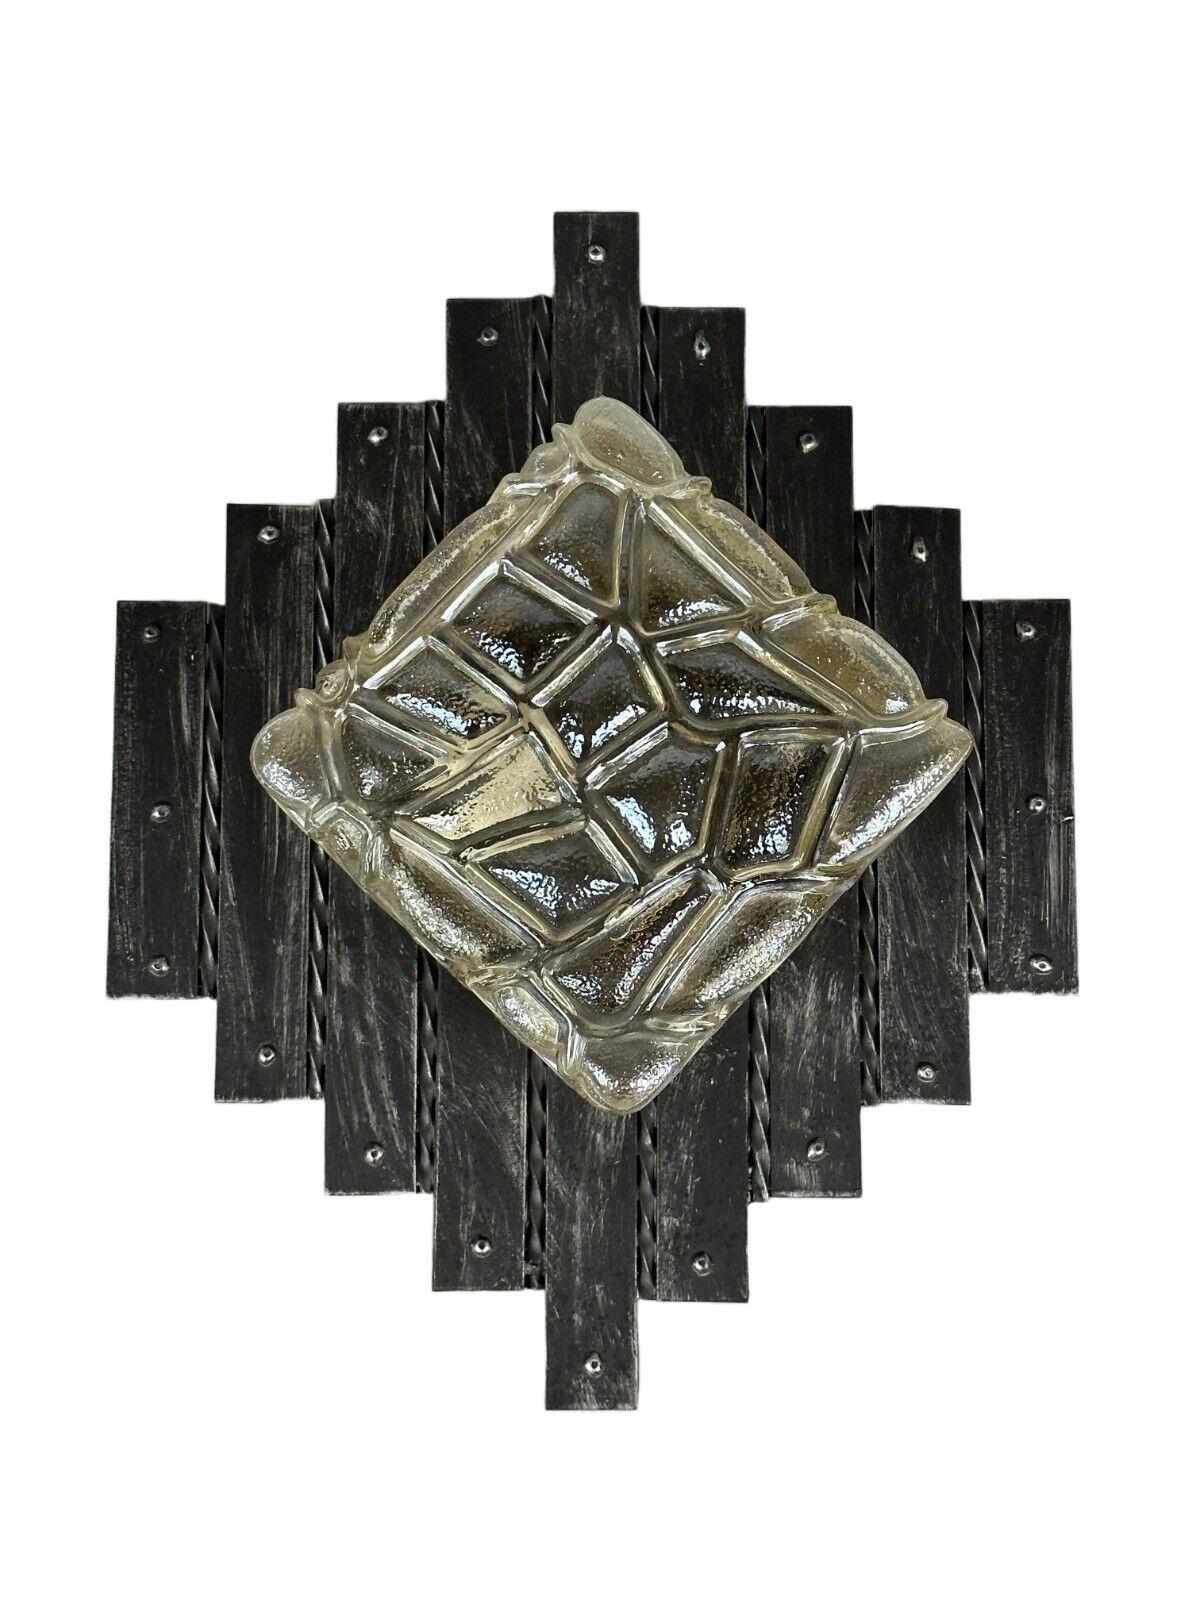 60's 70's Brutalist Wall Lamp Iron & Glass Wall Sconce

Object: wall lamp

Manufacturer:

Condition: good - vintage

Age: around 1960-1970

Dimensions:

Height= 48cm
Width = 38.5cm
Depth = 12cm

Other notes:

E27 socket

The pictures serve as part